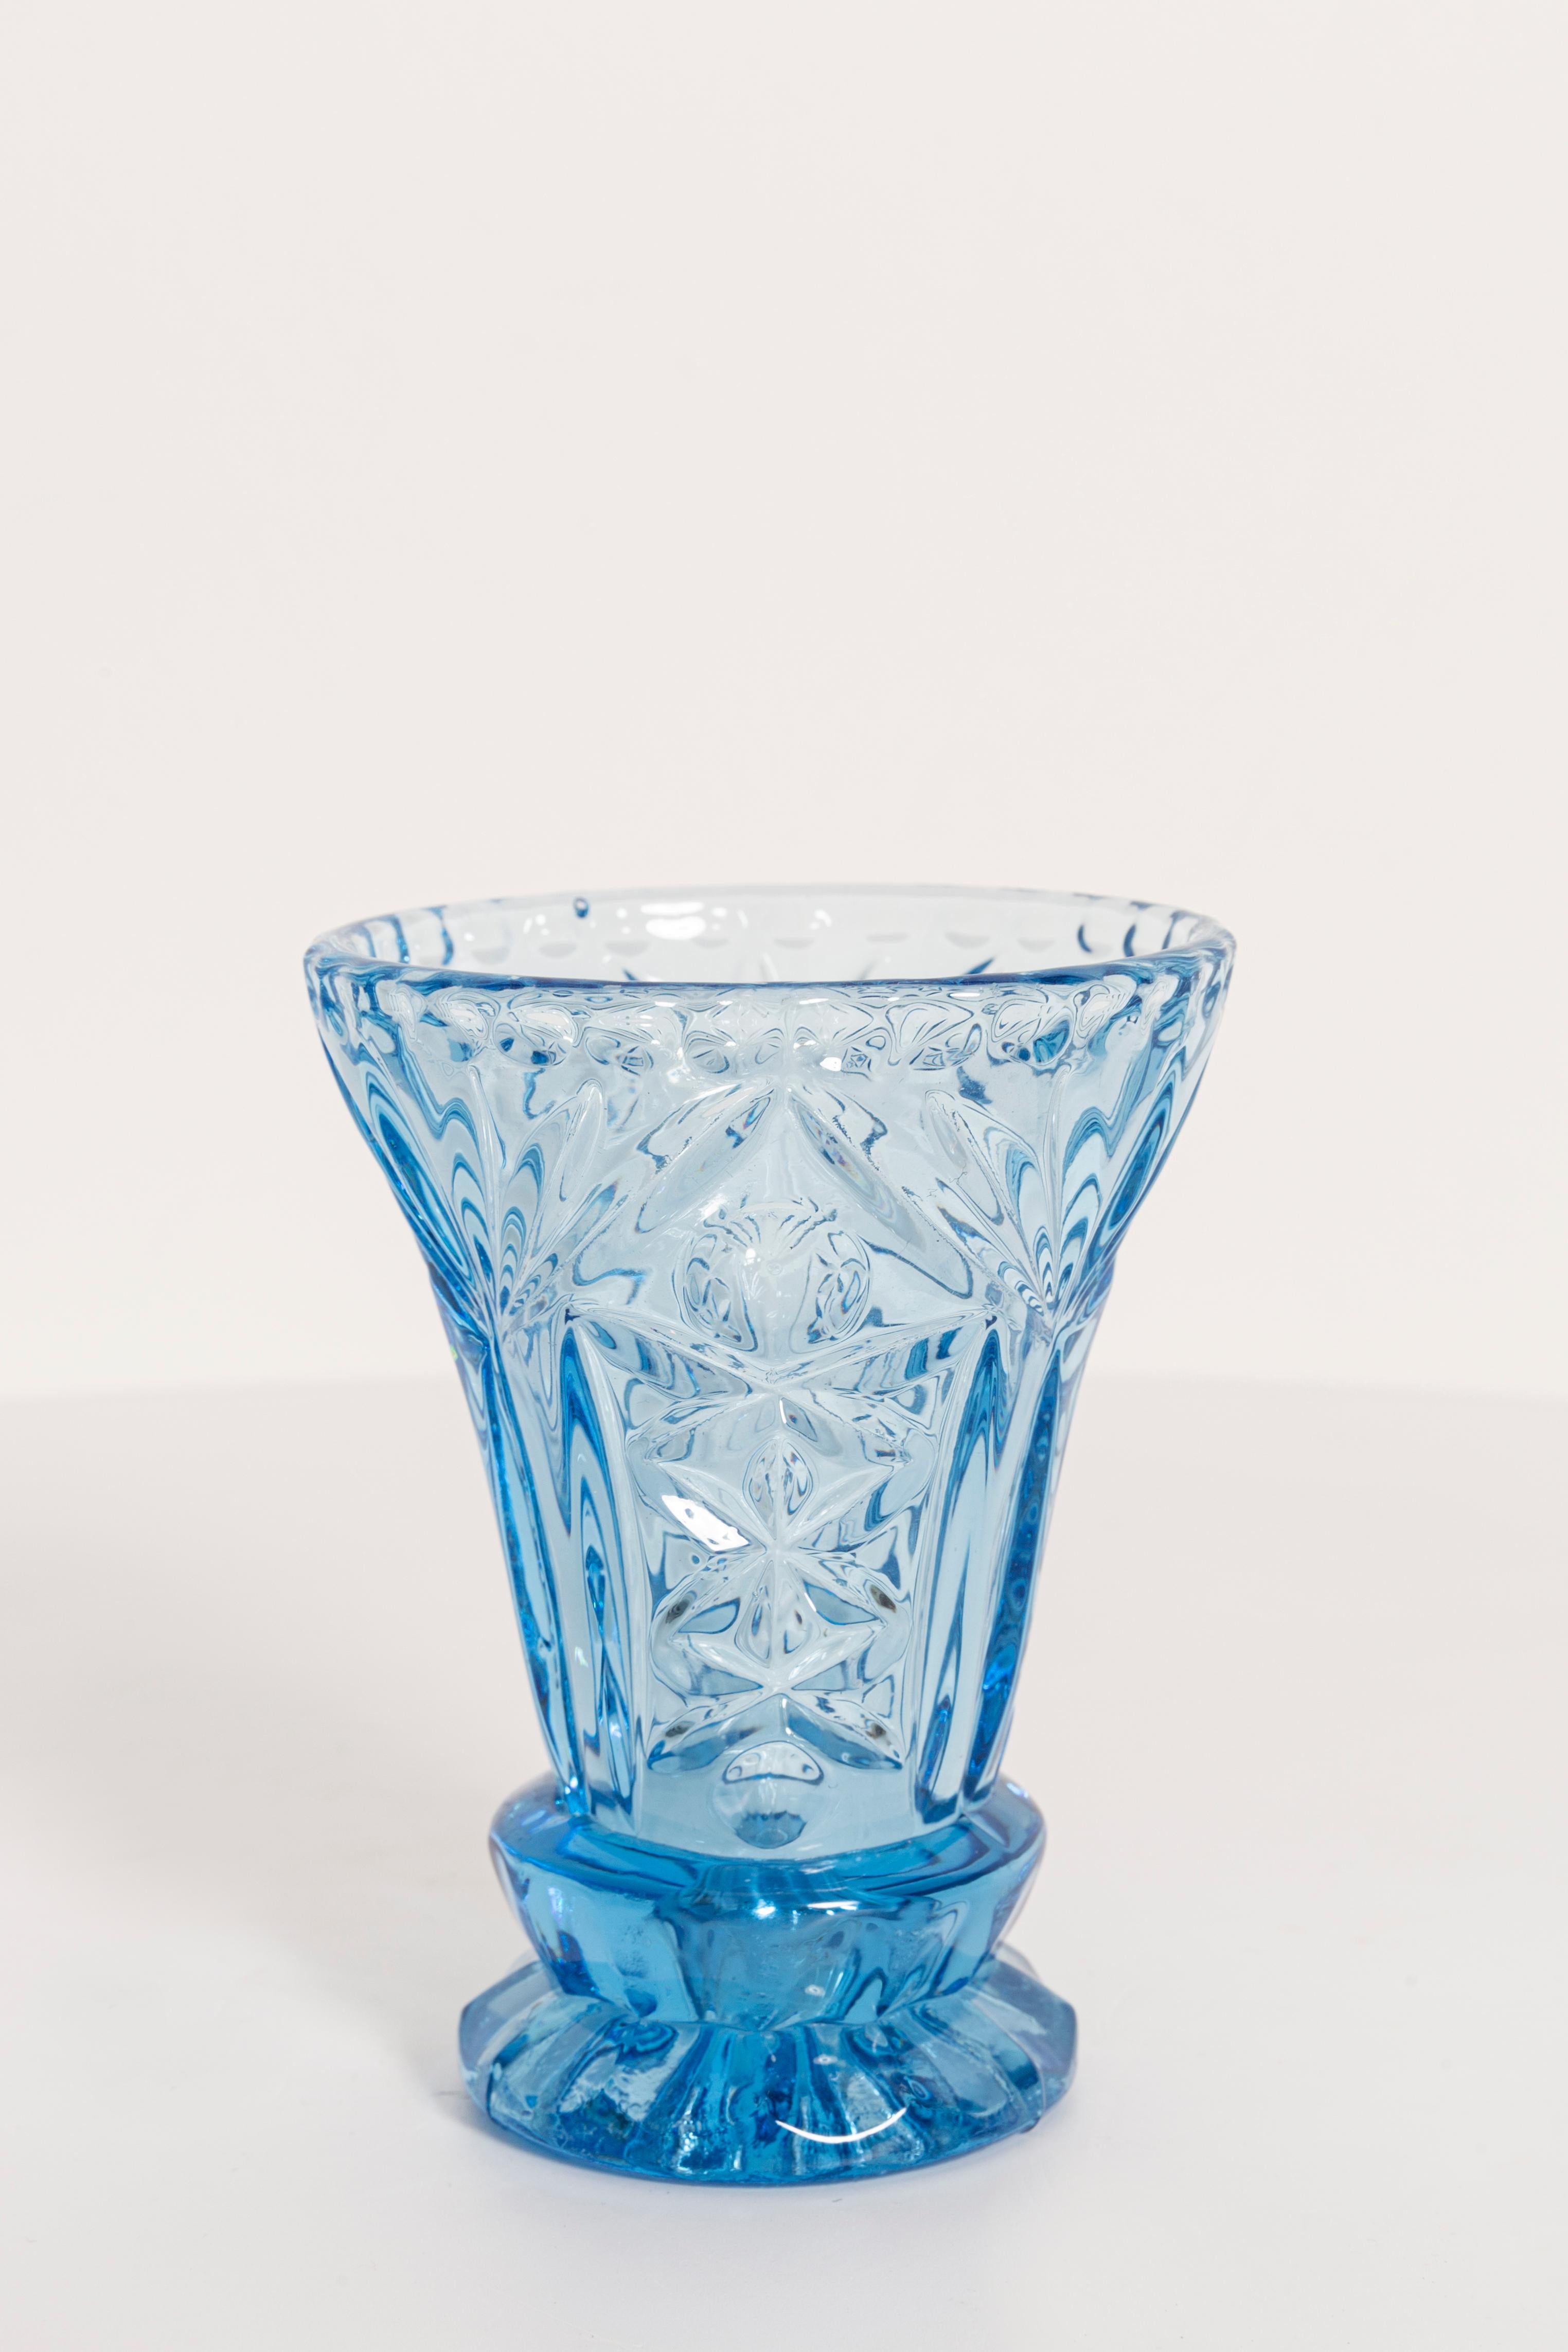 Produced in 1960s.

Pressed glass in perfect condition.
The vase looks like it has just been taken out of the box.
The picture reflects the color in which it presents live.

No jags, defects etc. 
The irregular surface of the object reflects